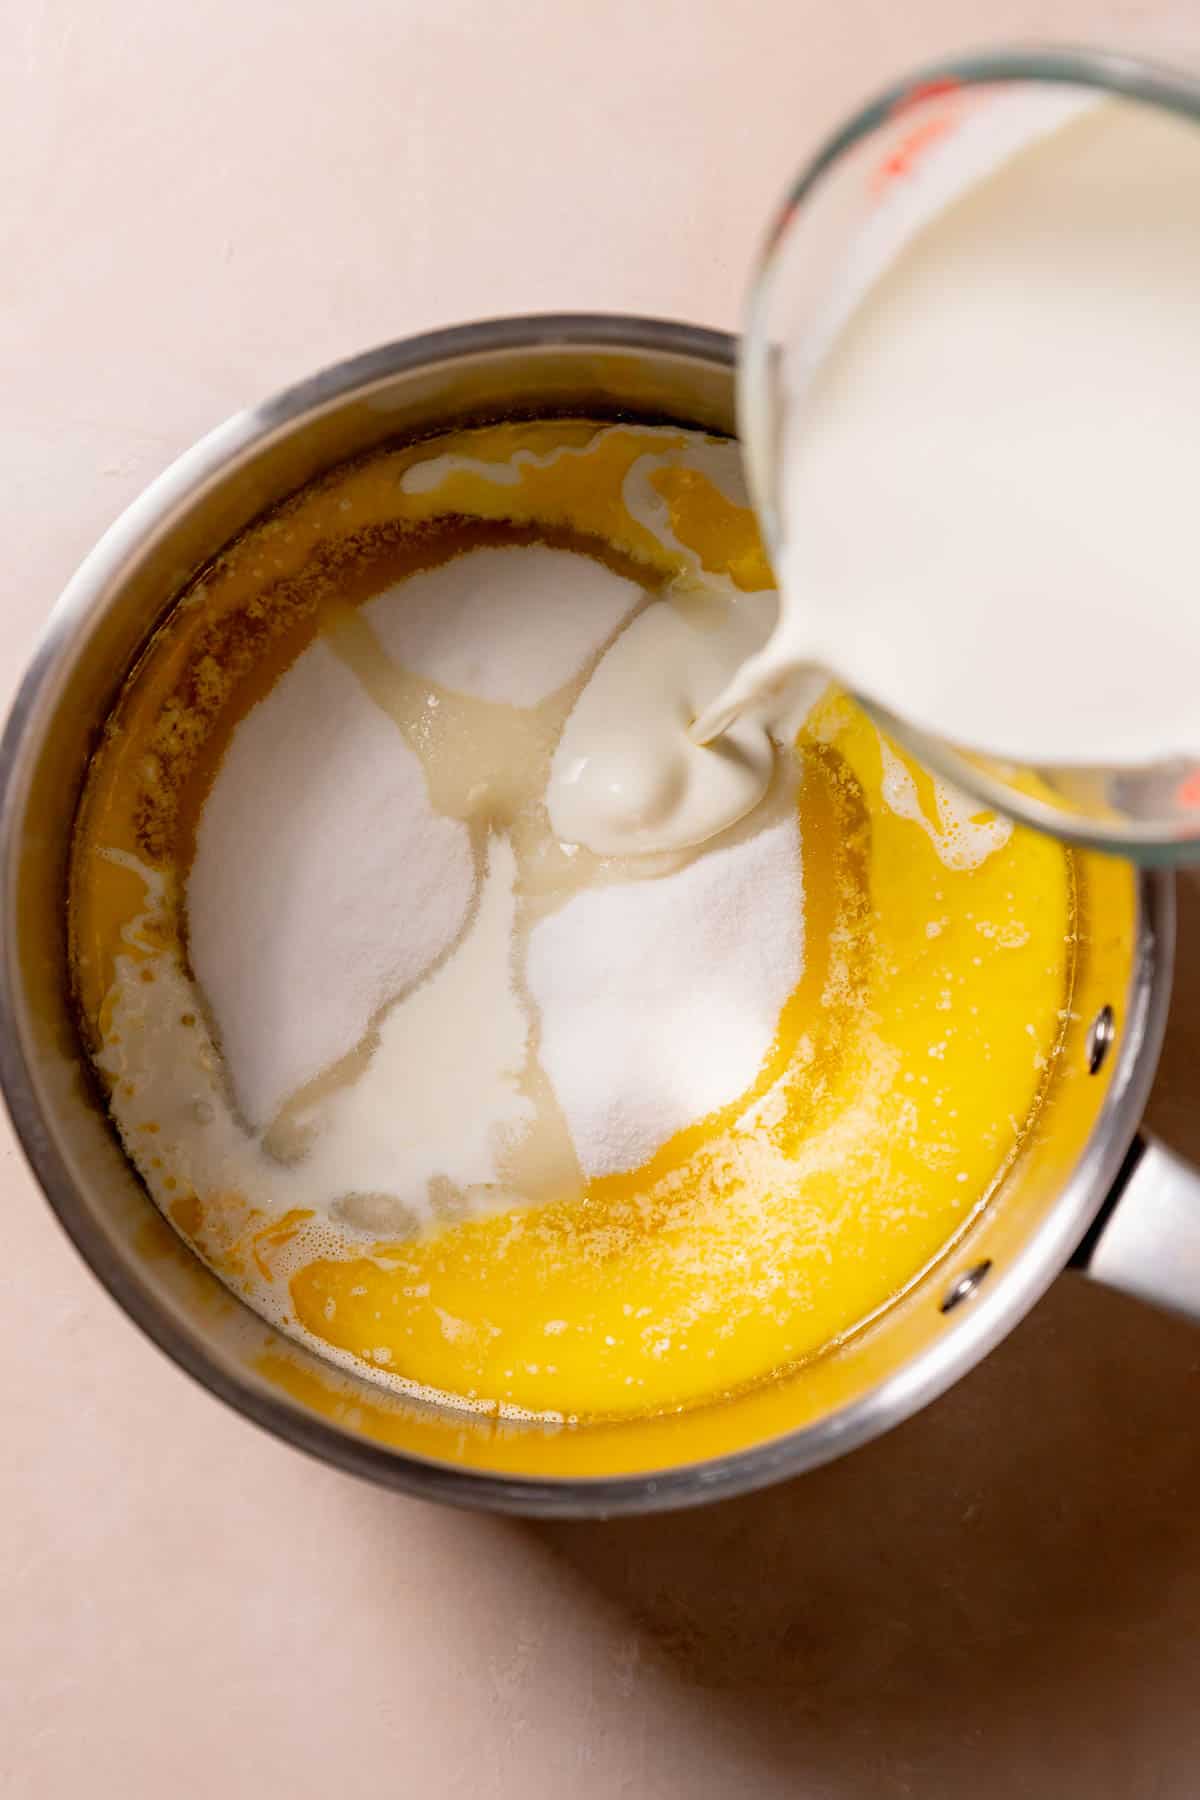 Pouring heavy cream into a pot with melted butter and sugar.